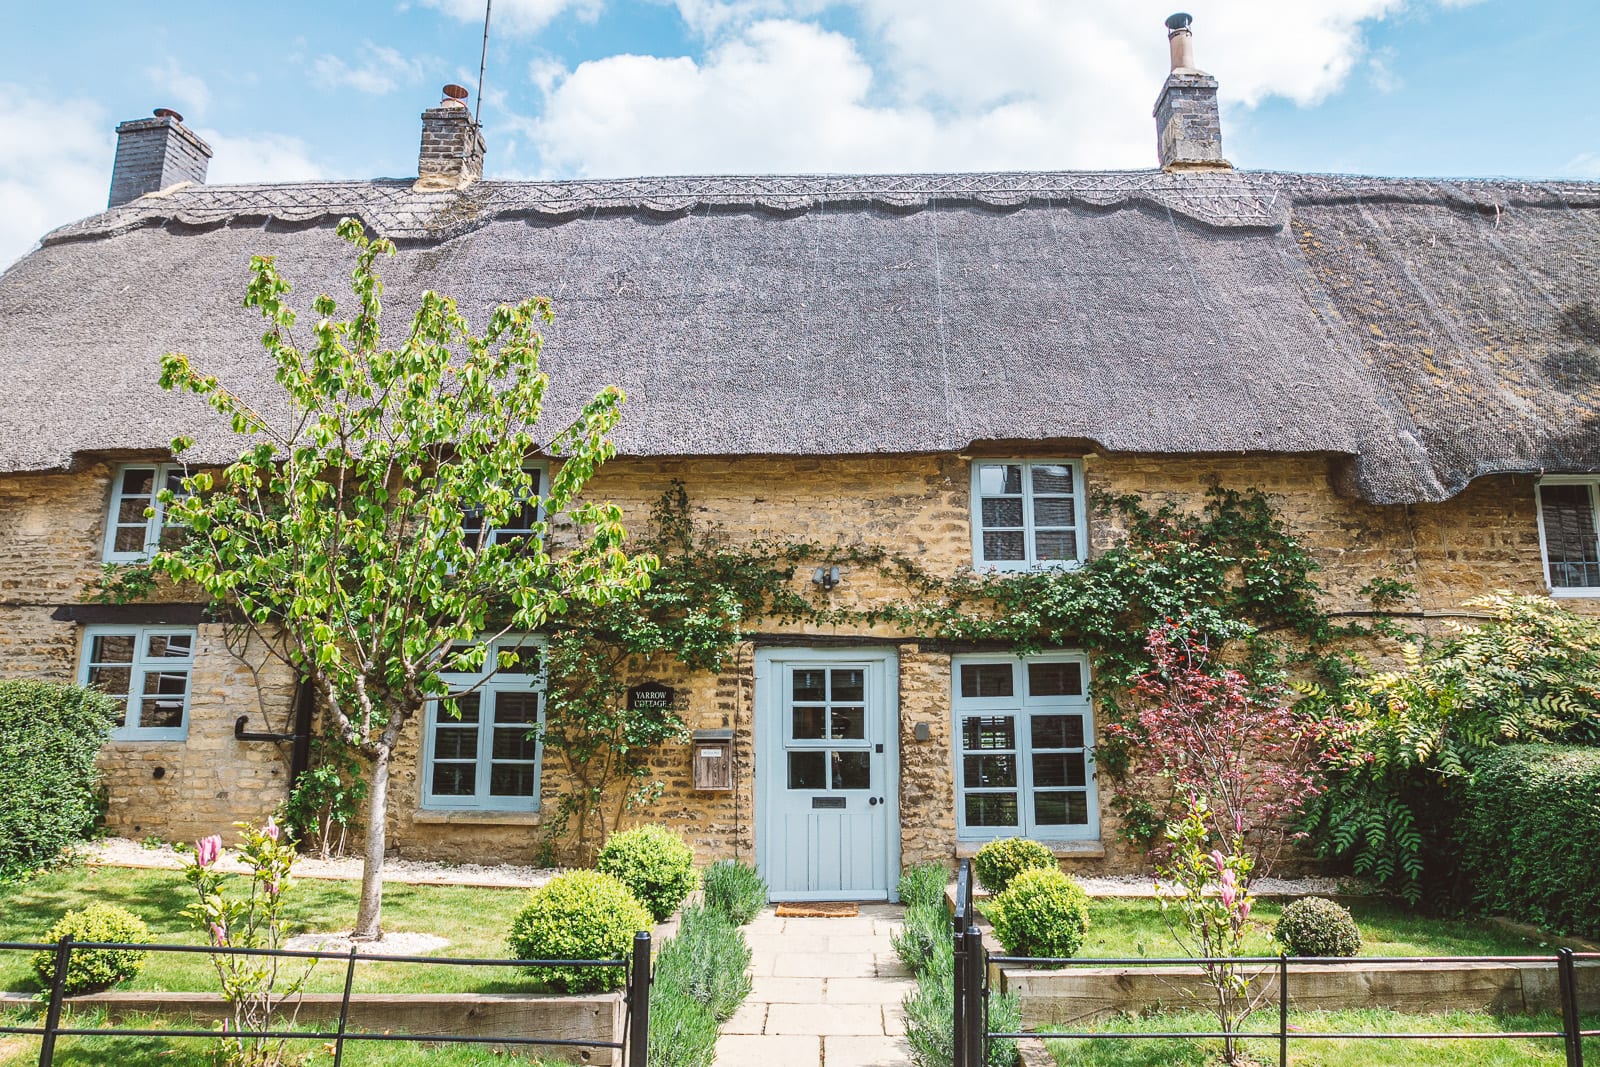 The exterior of a country cottage with a large thatched roof and a lovely front garden